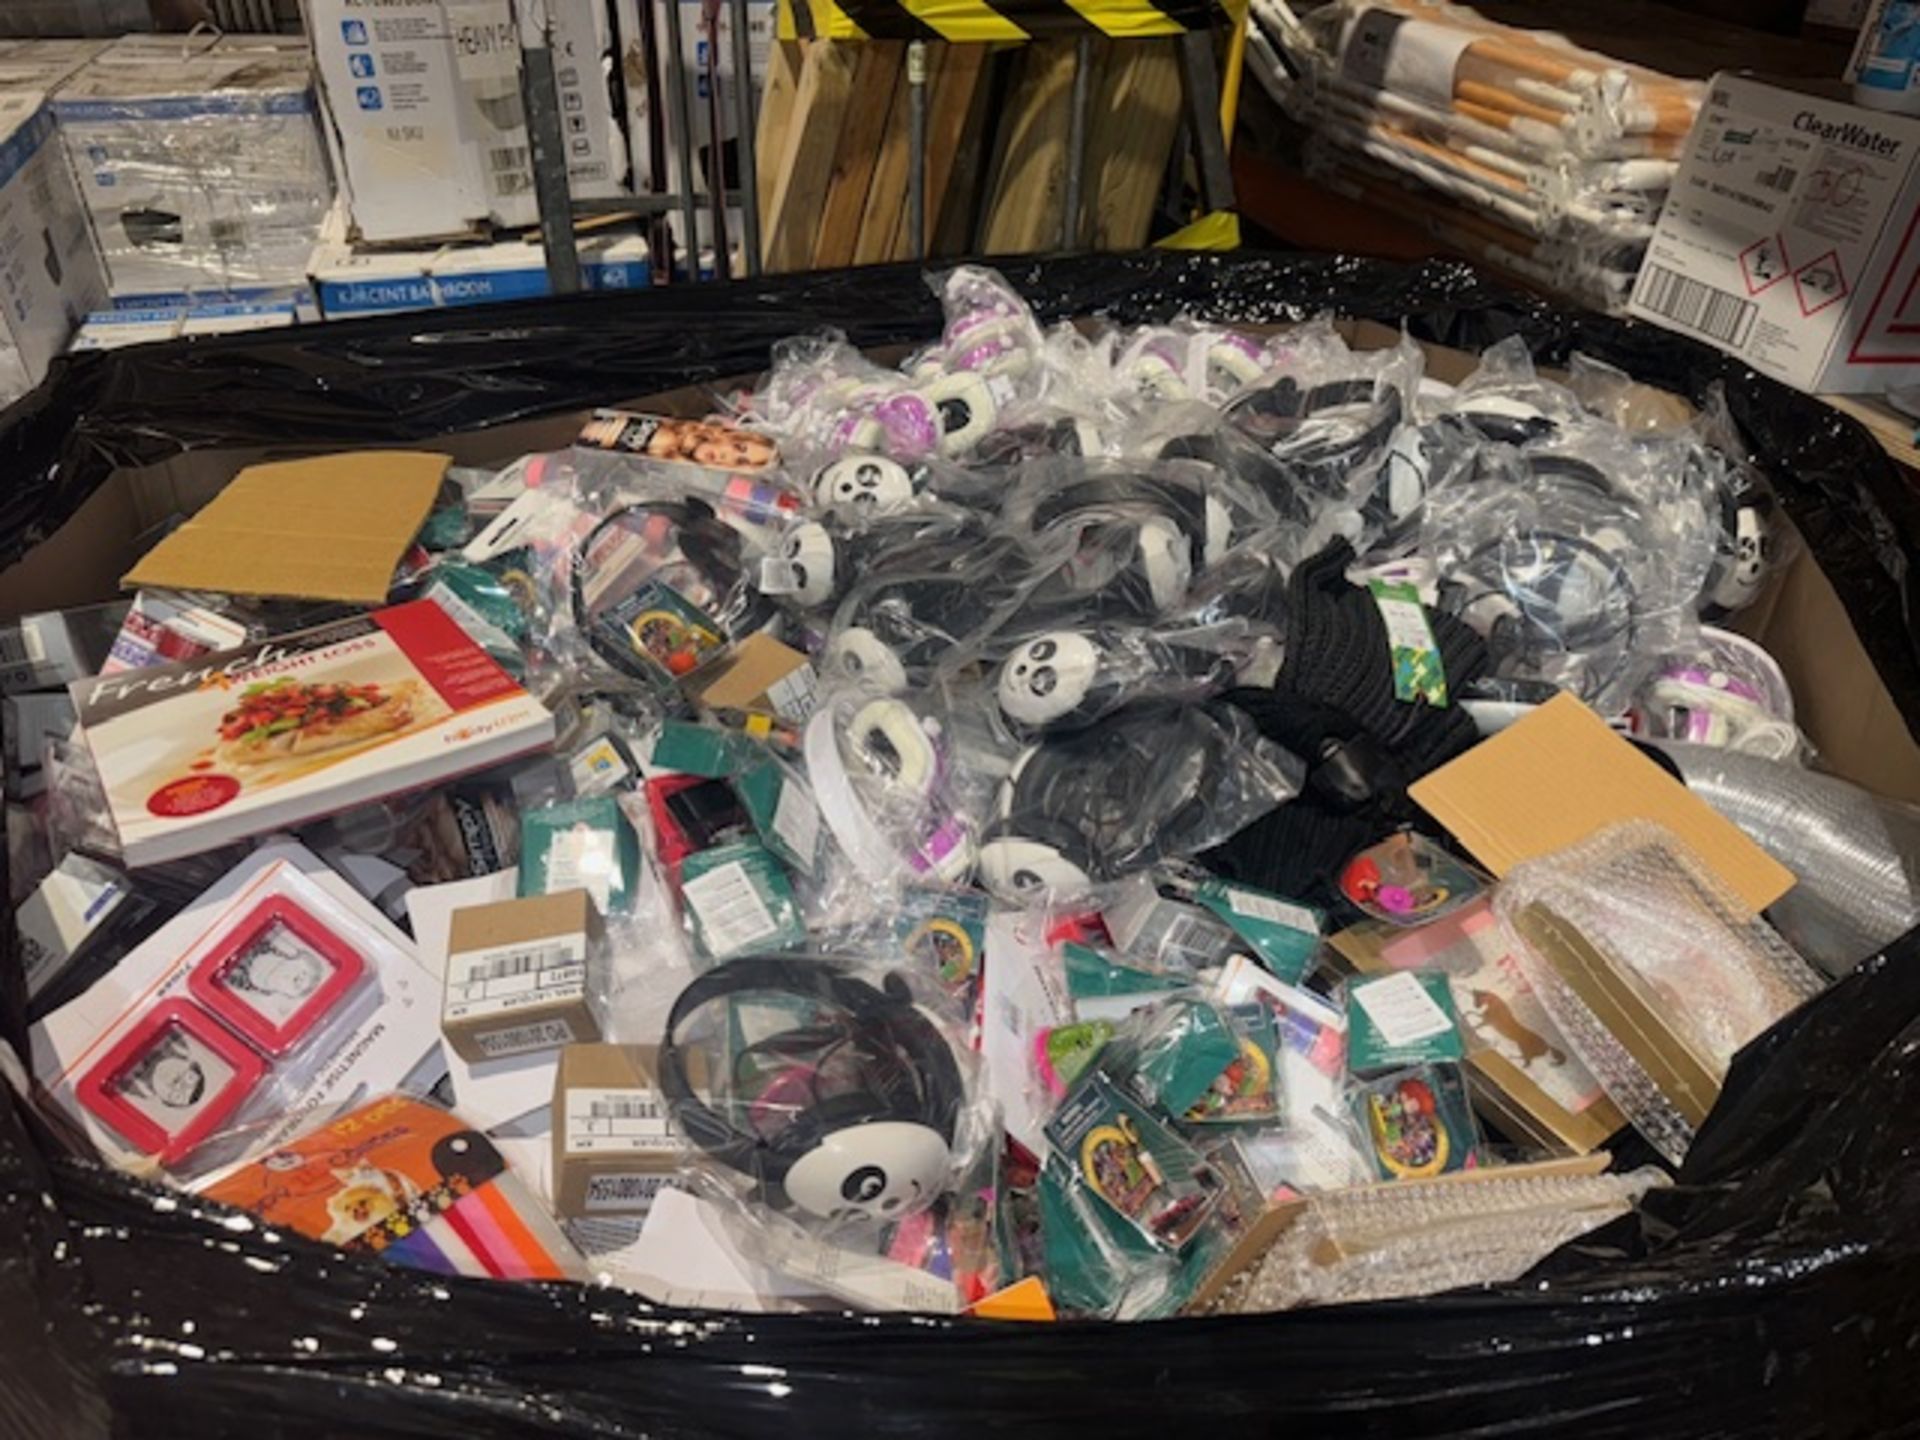 1000 PIECE BRAND NEW MIXED AMAZON OVERSTOCK LOT INCLUDING TOYS,, HATS, GLOVES, PET PRODUCTS,